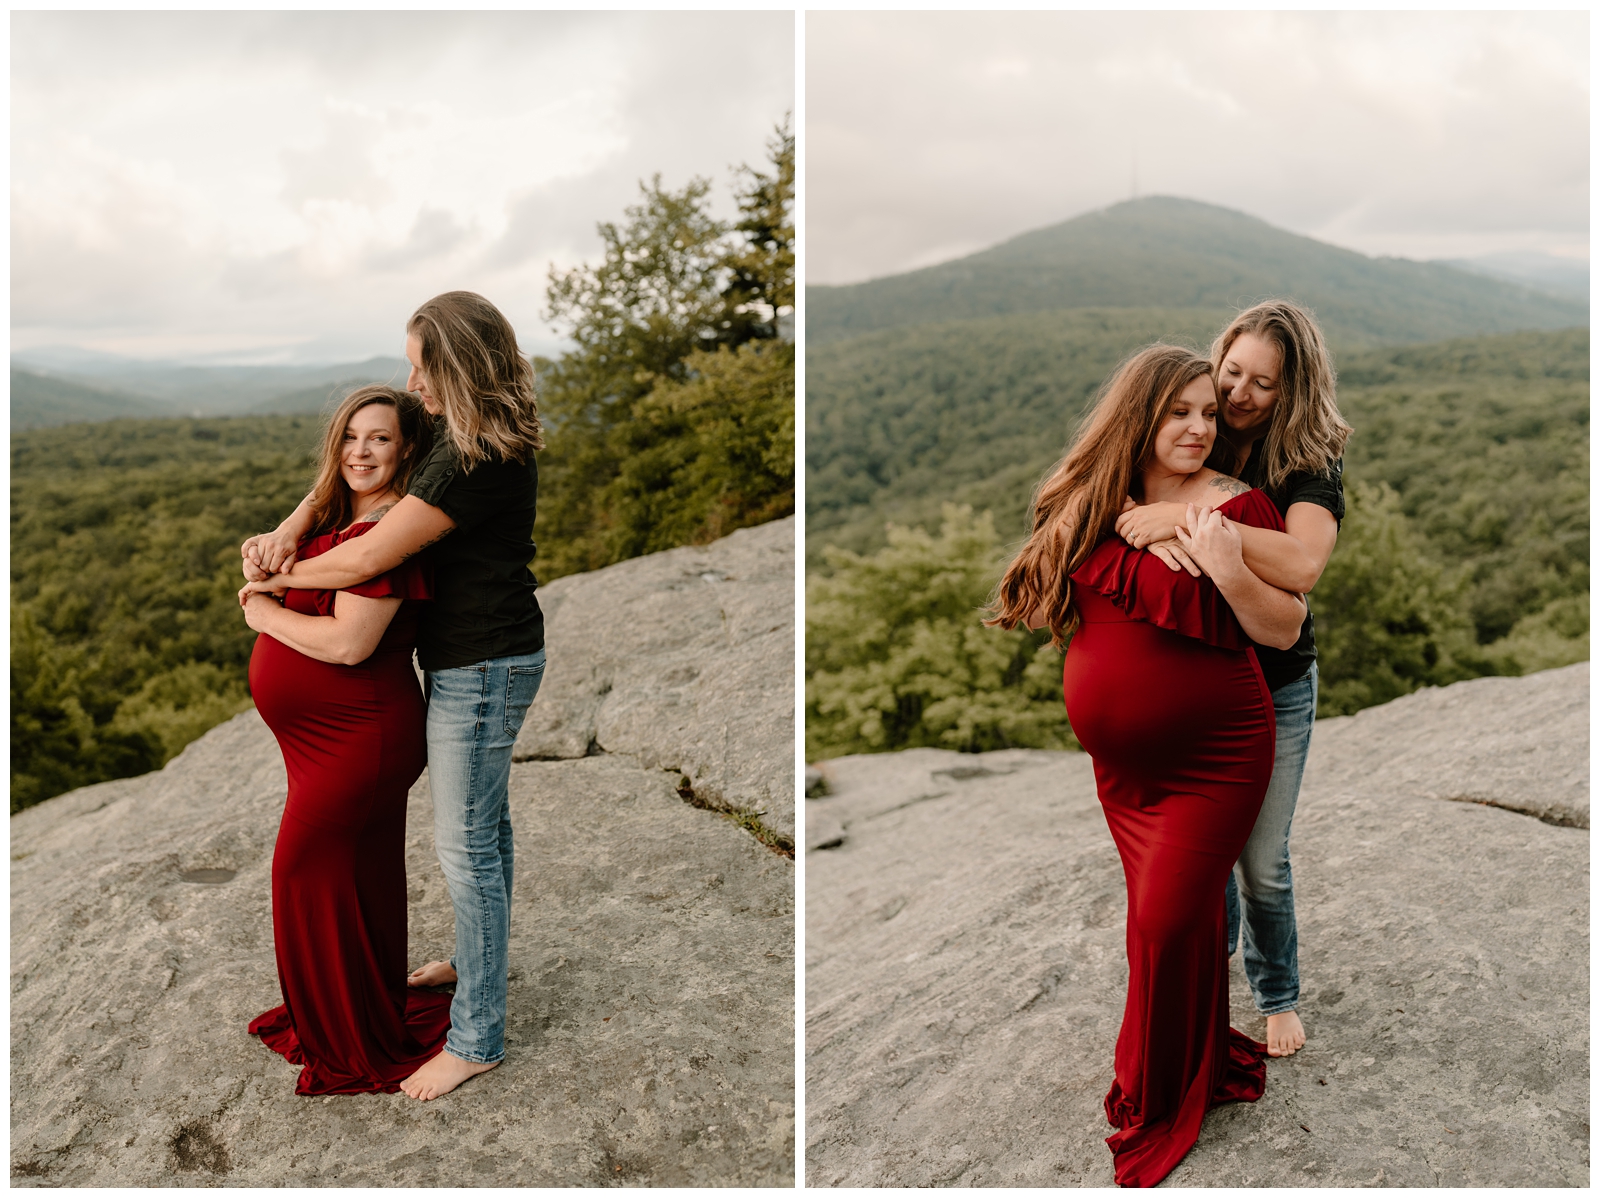 Maternity session with mountain views in North Carolina by adventurous photographer